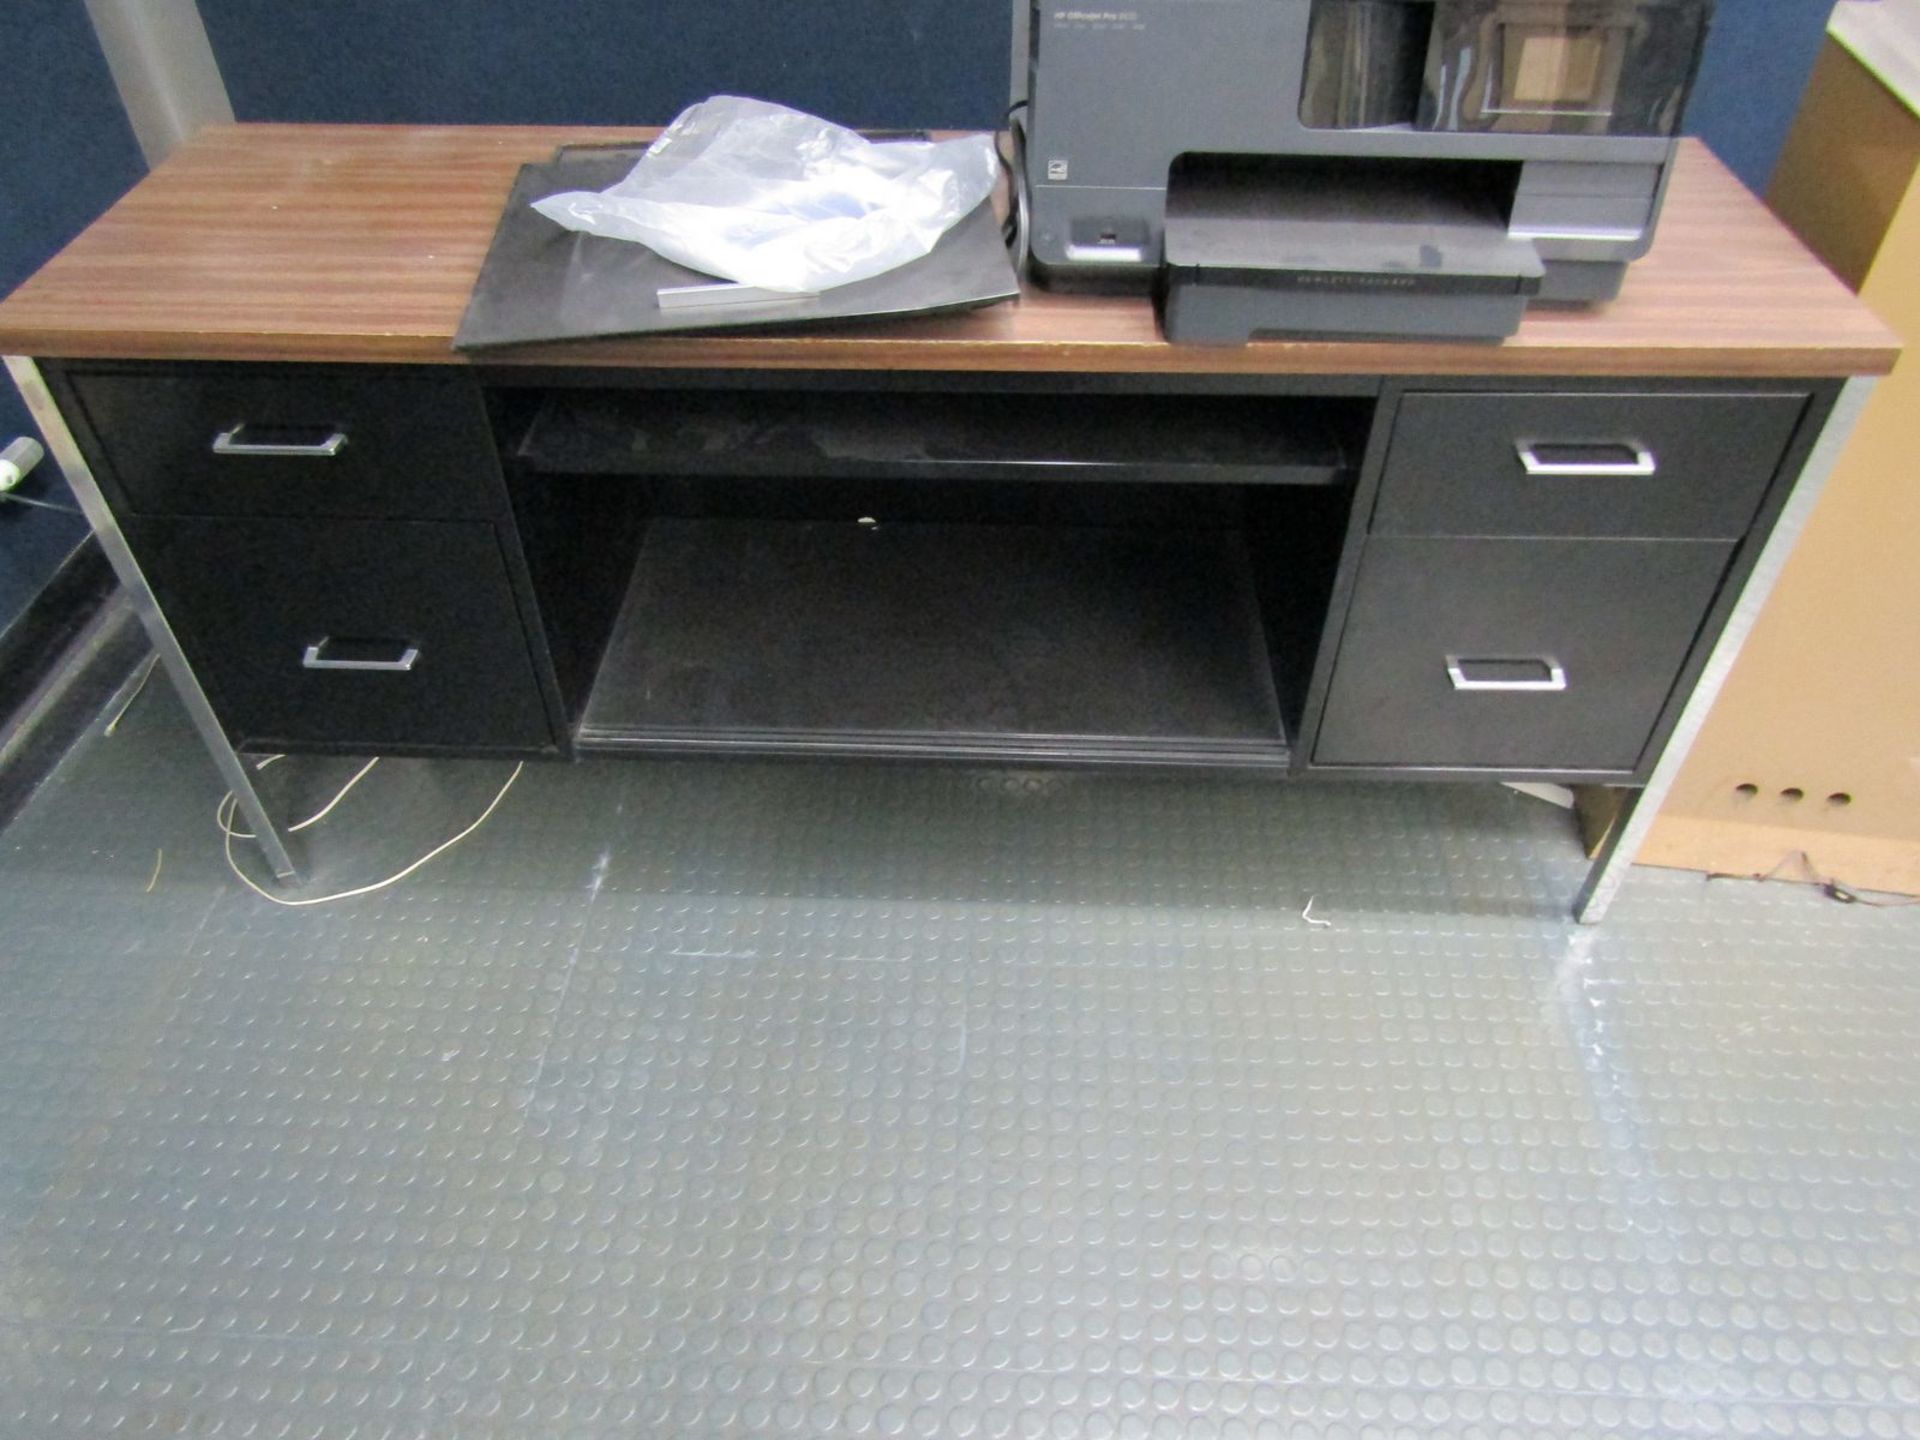 Lot - Remaining Contents of IT Room, to Include: Desks, Chairs, Filing Cabinets, Shelving Units, - Image 10 of 10